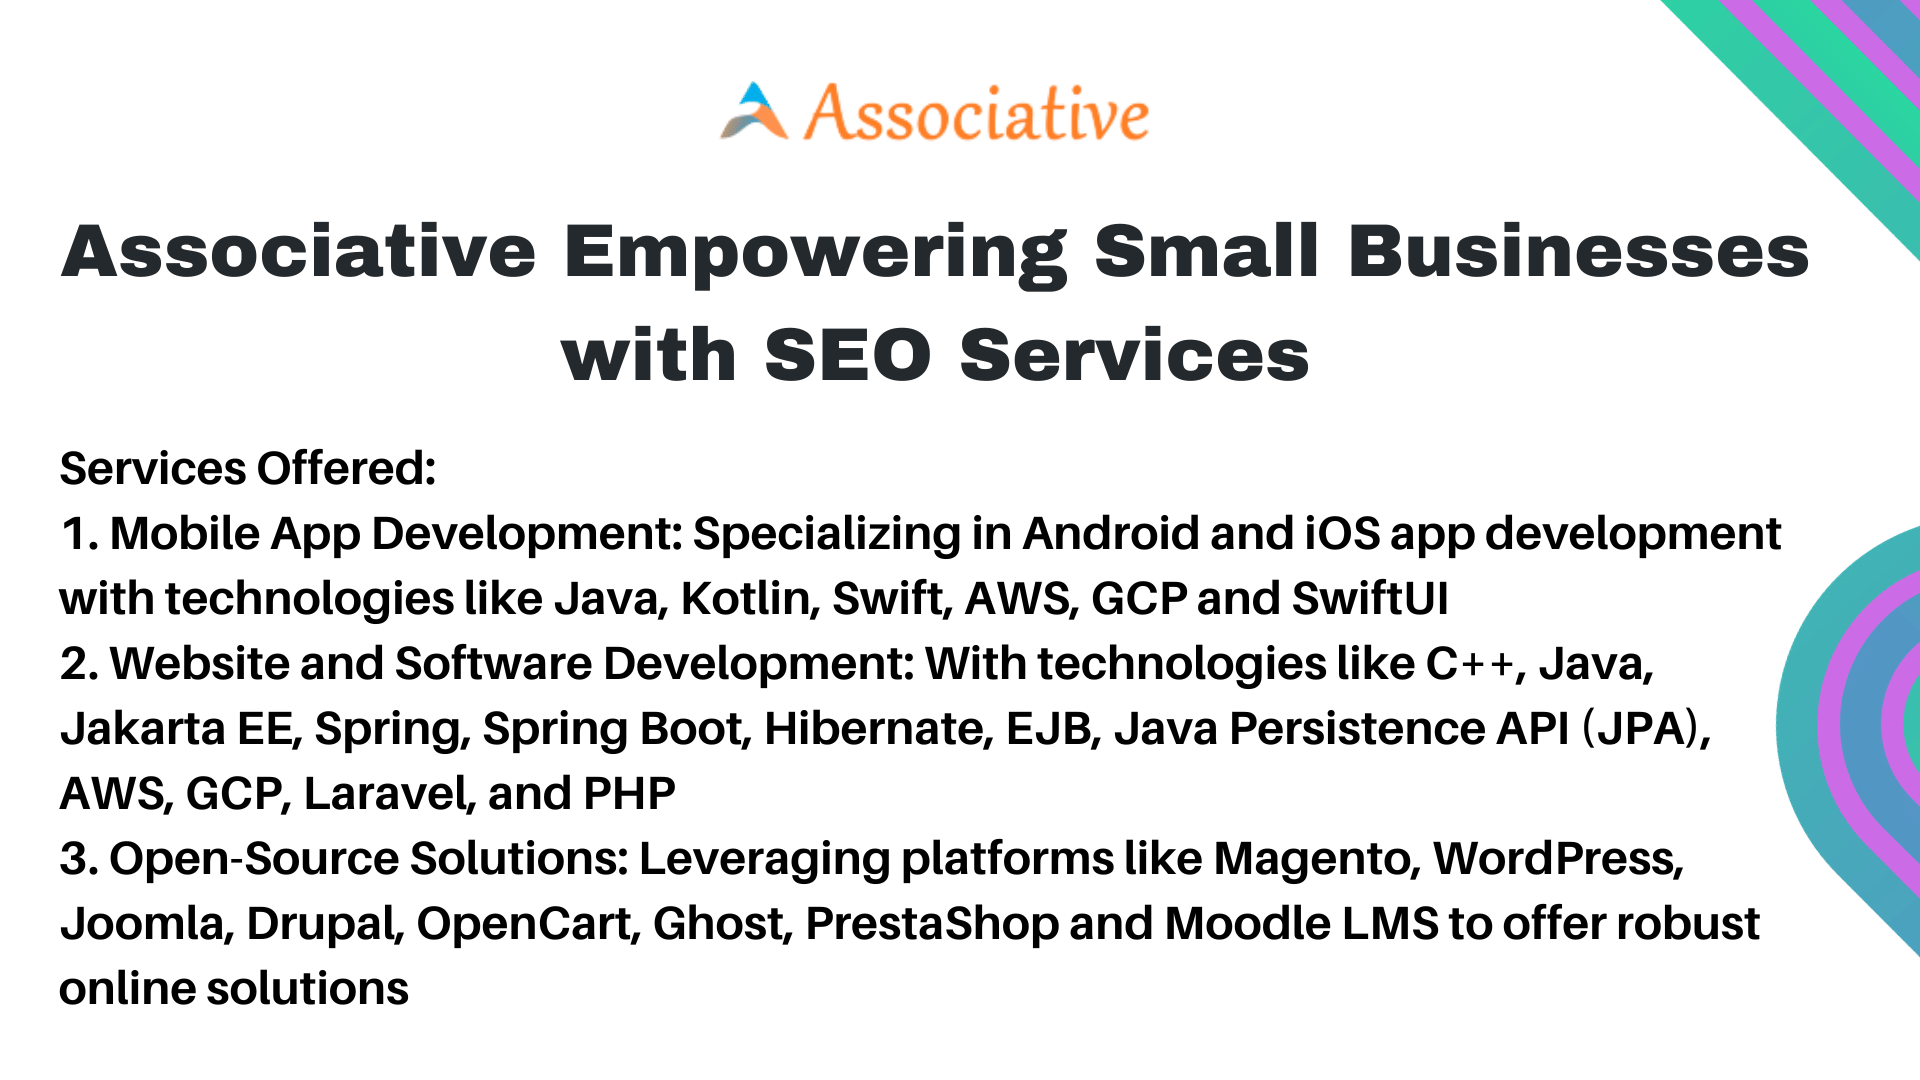 Associative Empowering Small Businesses with SEO Services